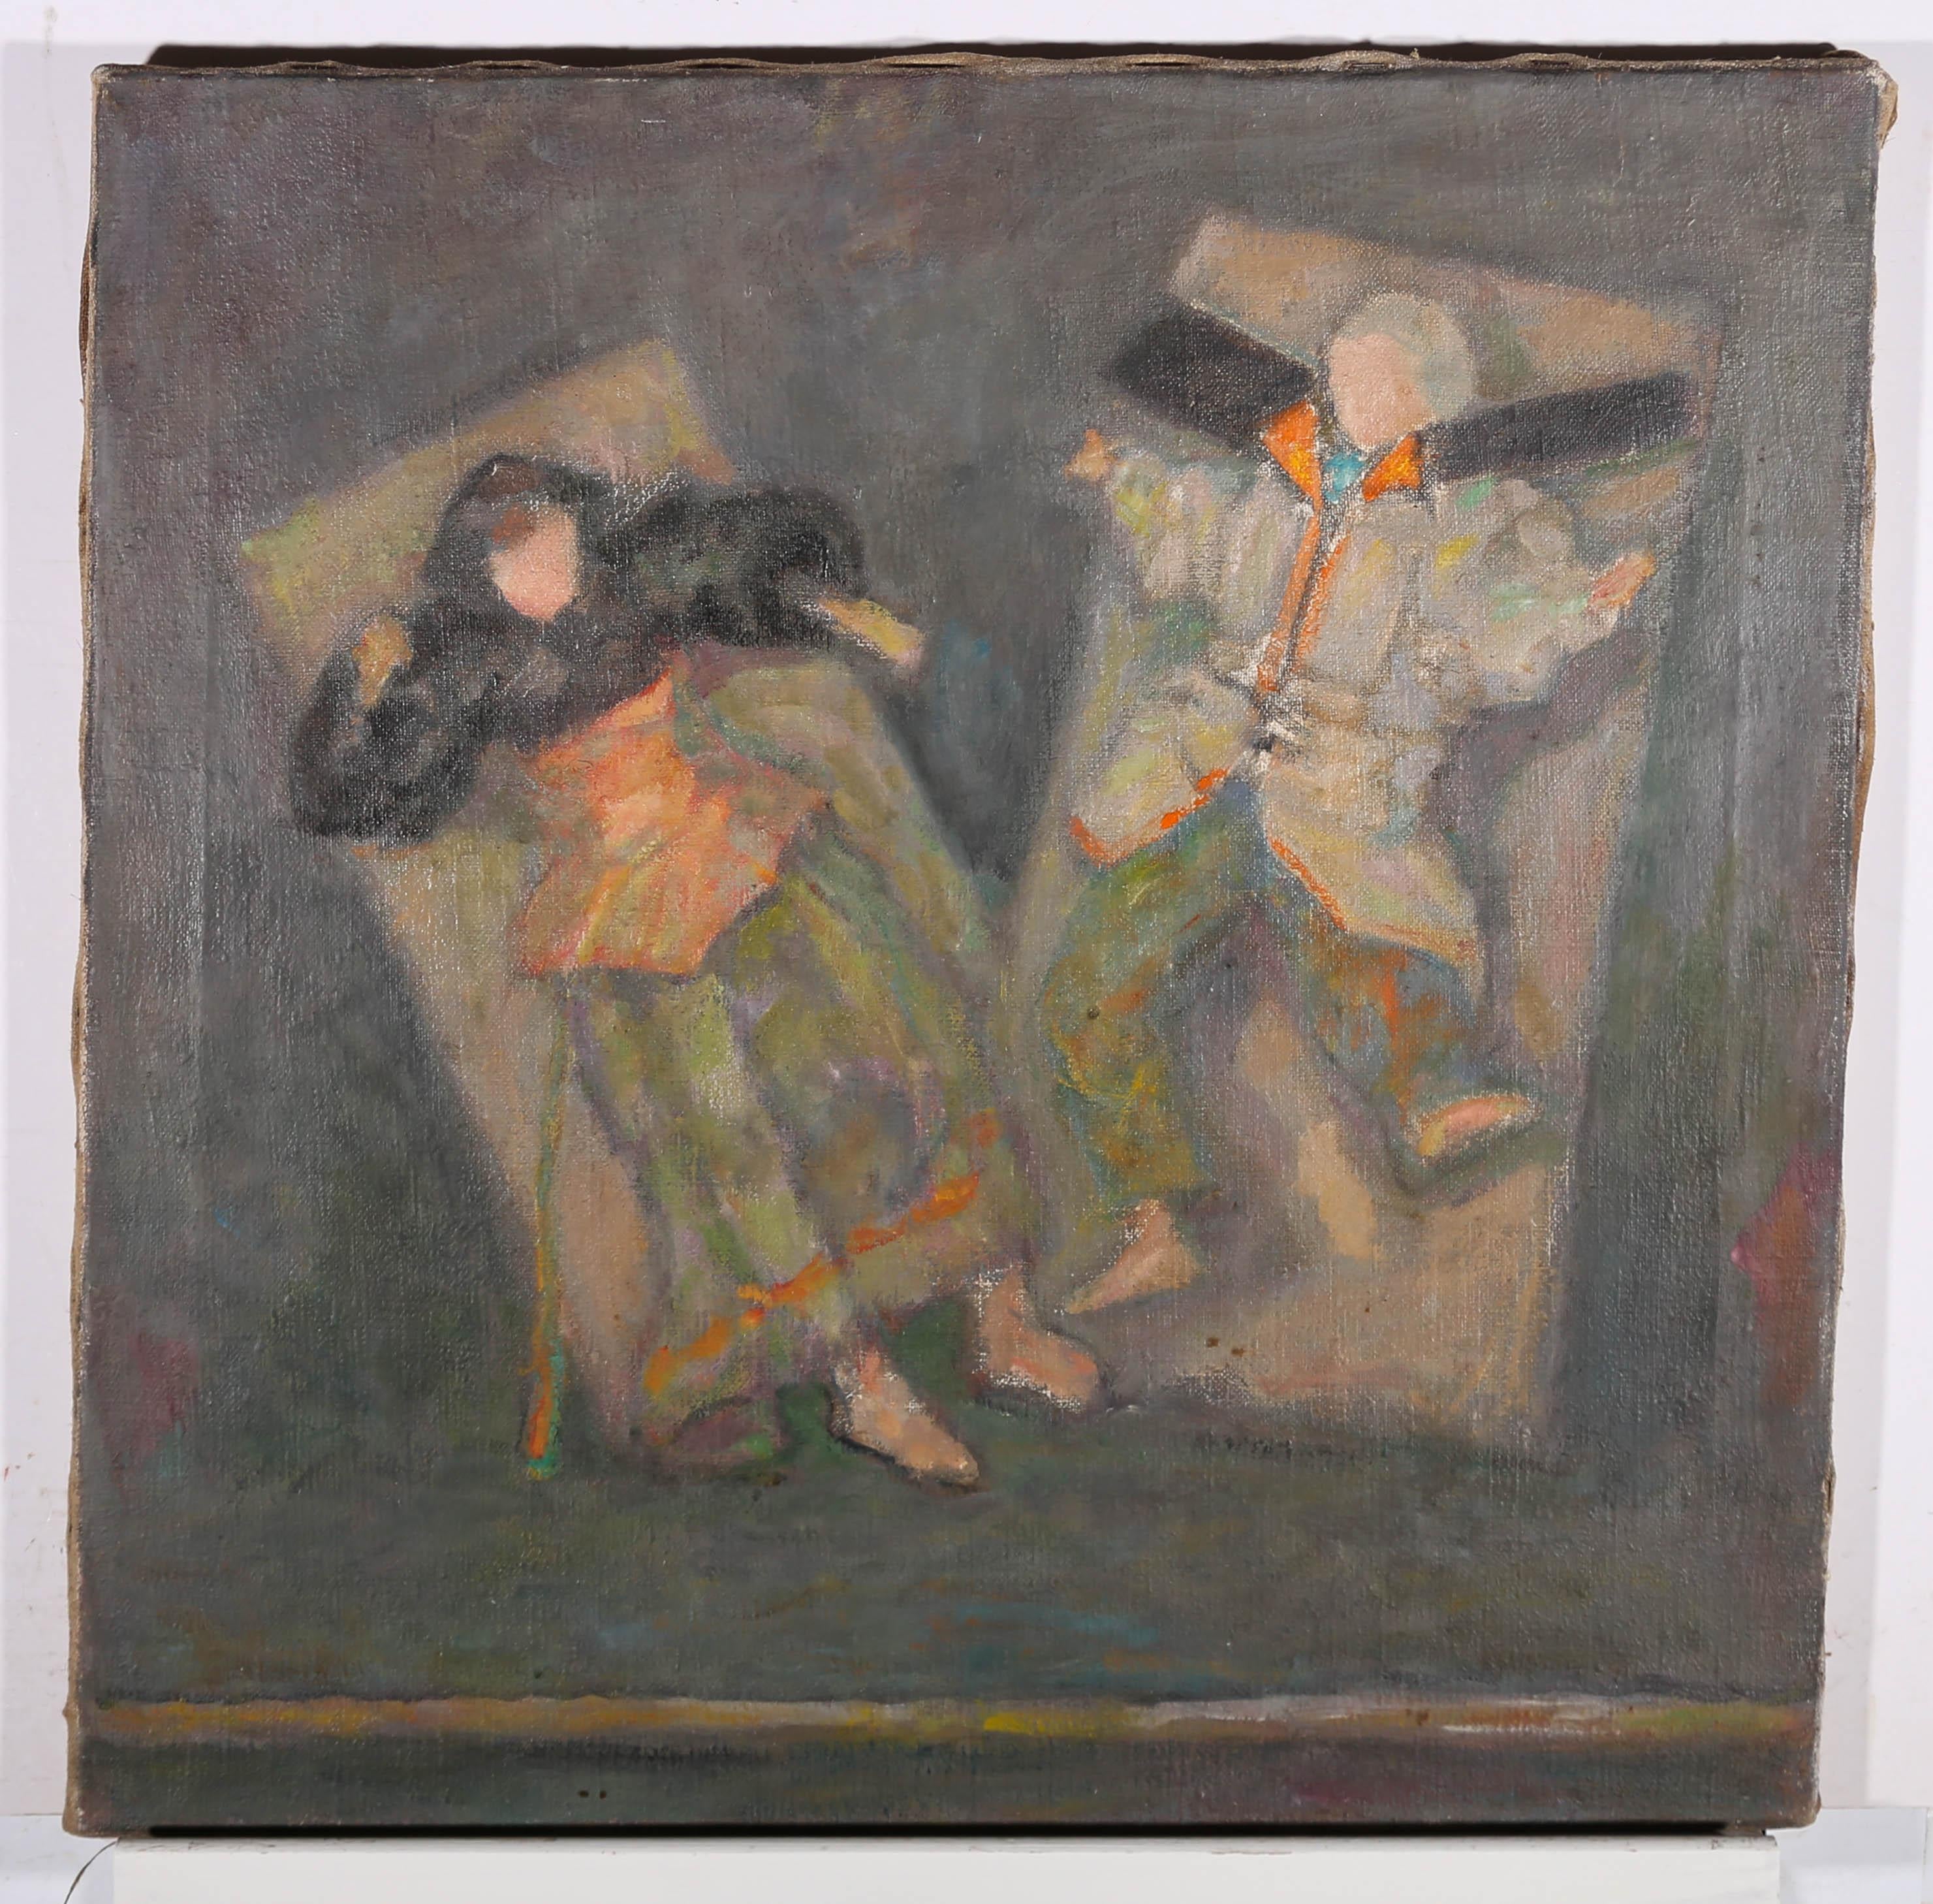 An unusual composition in oil, showing two puppets, lying lifeless on top of their boxes. The artist has used a muted palette and soft brush work to create a simplicity that heightens the unusual composition. The artist has signed, dated and